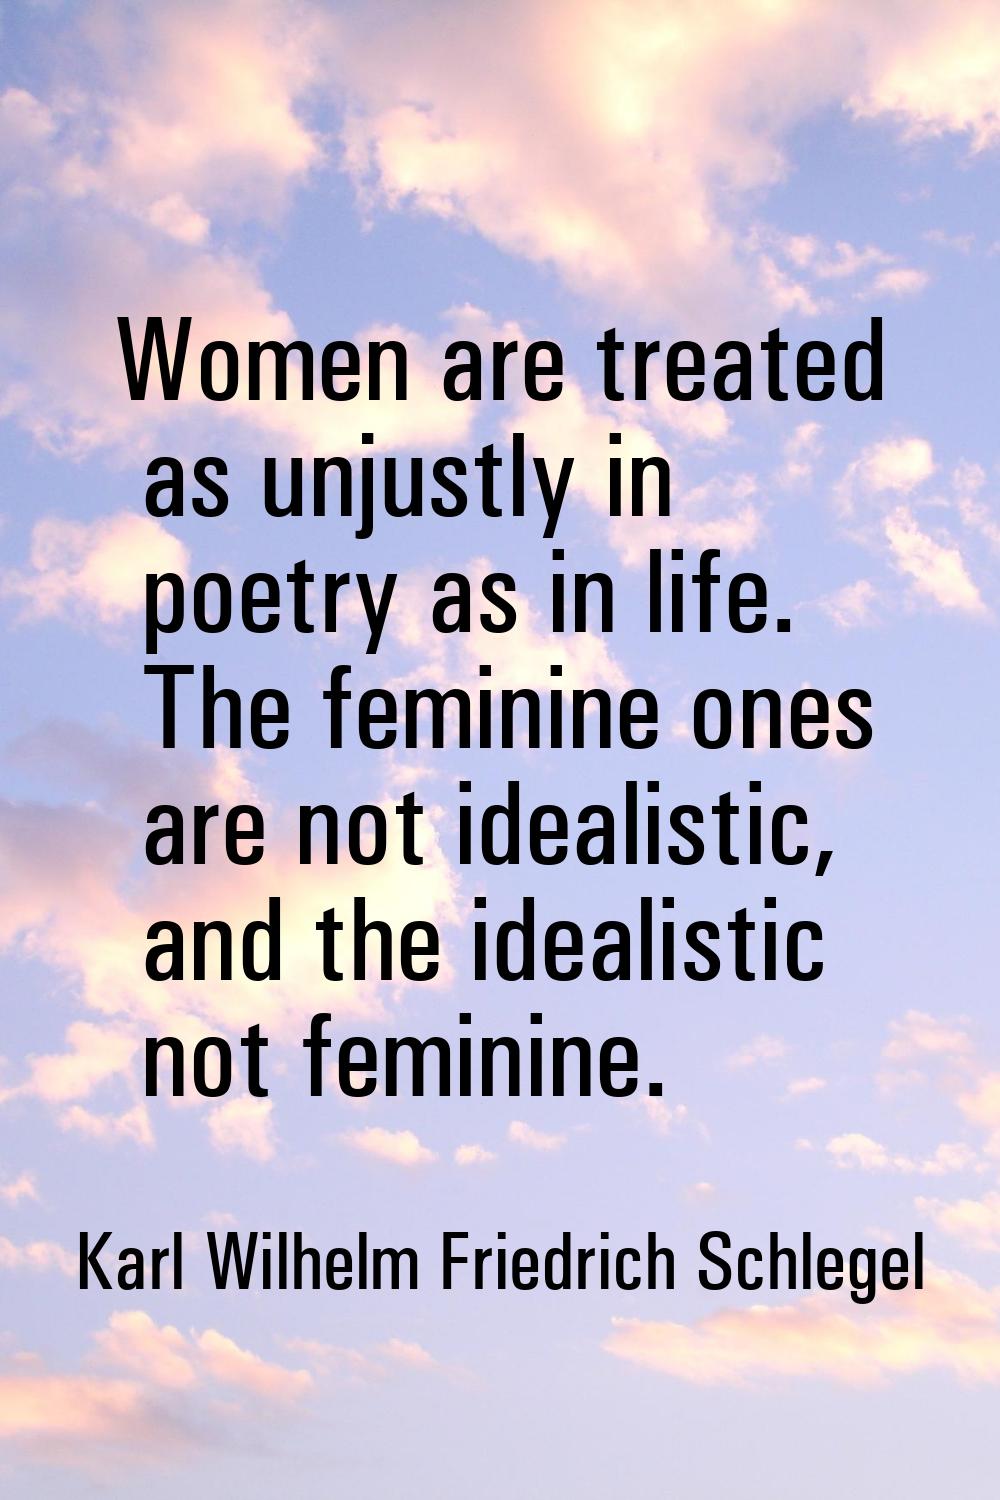 Women are treated as unjustly in poetry as in life. The feminine ones are not idealistic, and the i